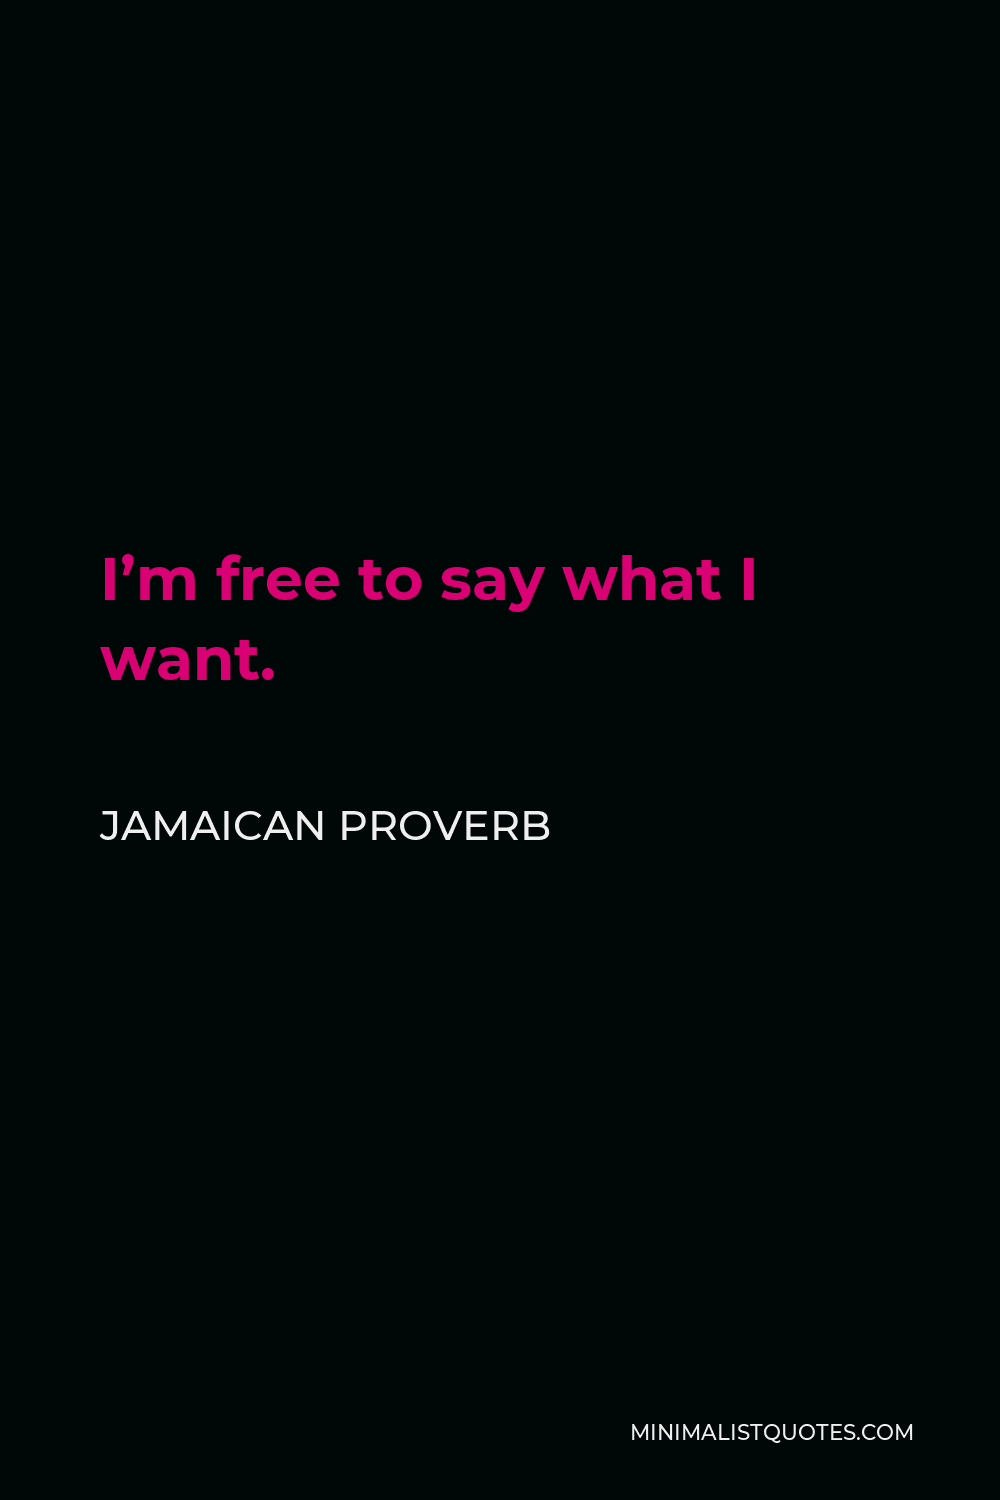 Jamaican Proverb Quote - I’m free to say what I want.